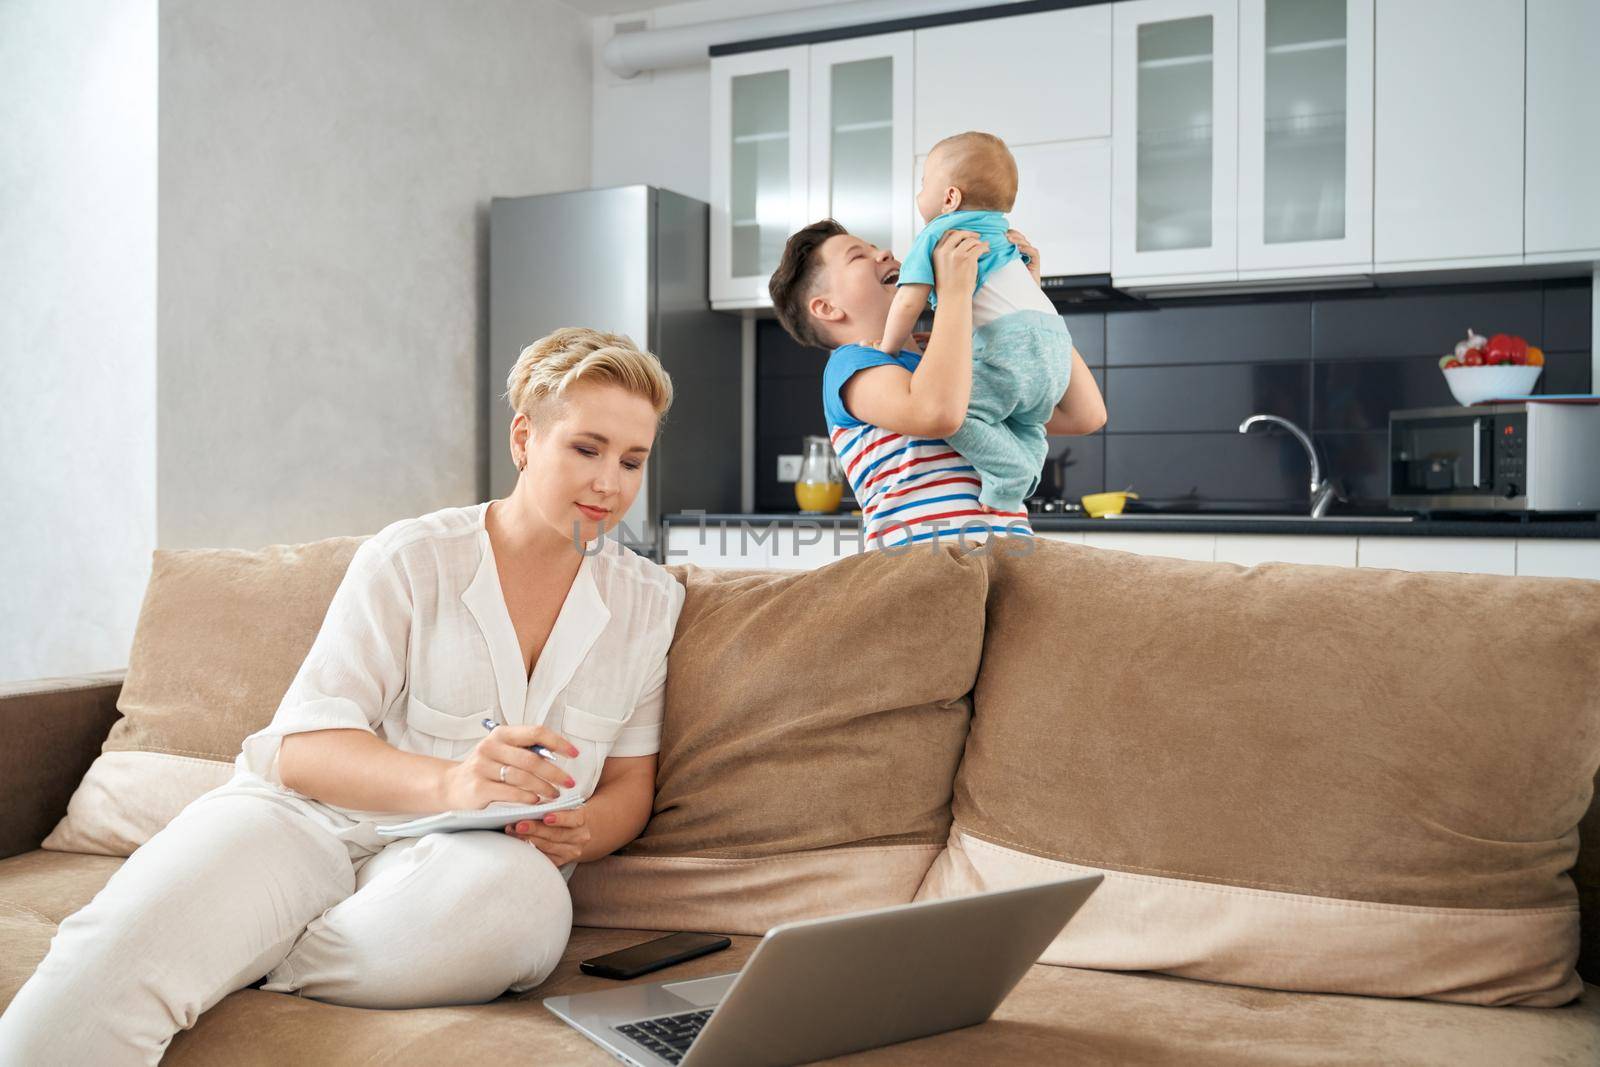 Pleasant woman with short blond hair sitting on couch and working on laptop. To happy boys playing and smiling on kitchen. Concept of household and work.